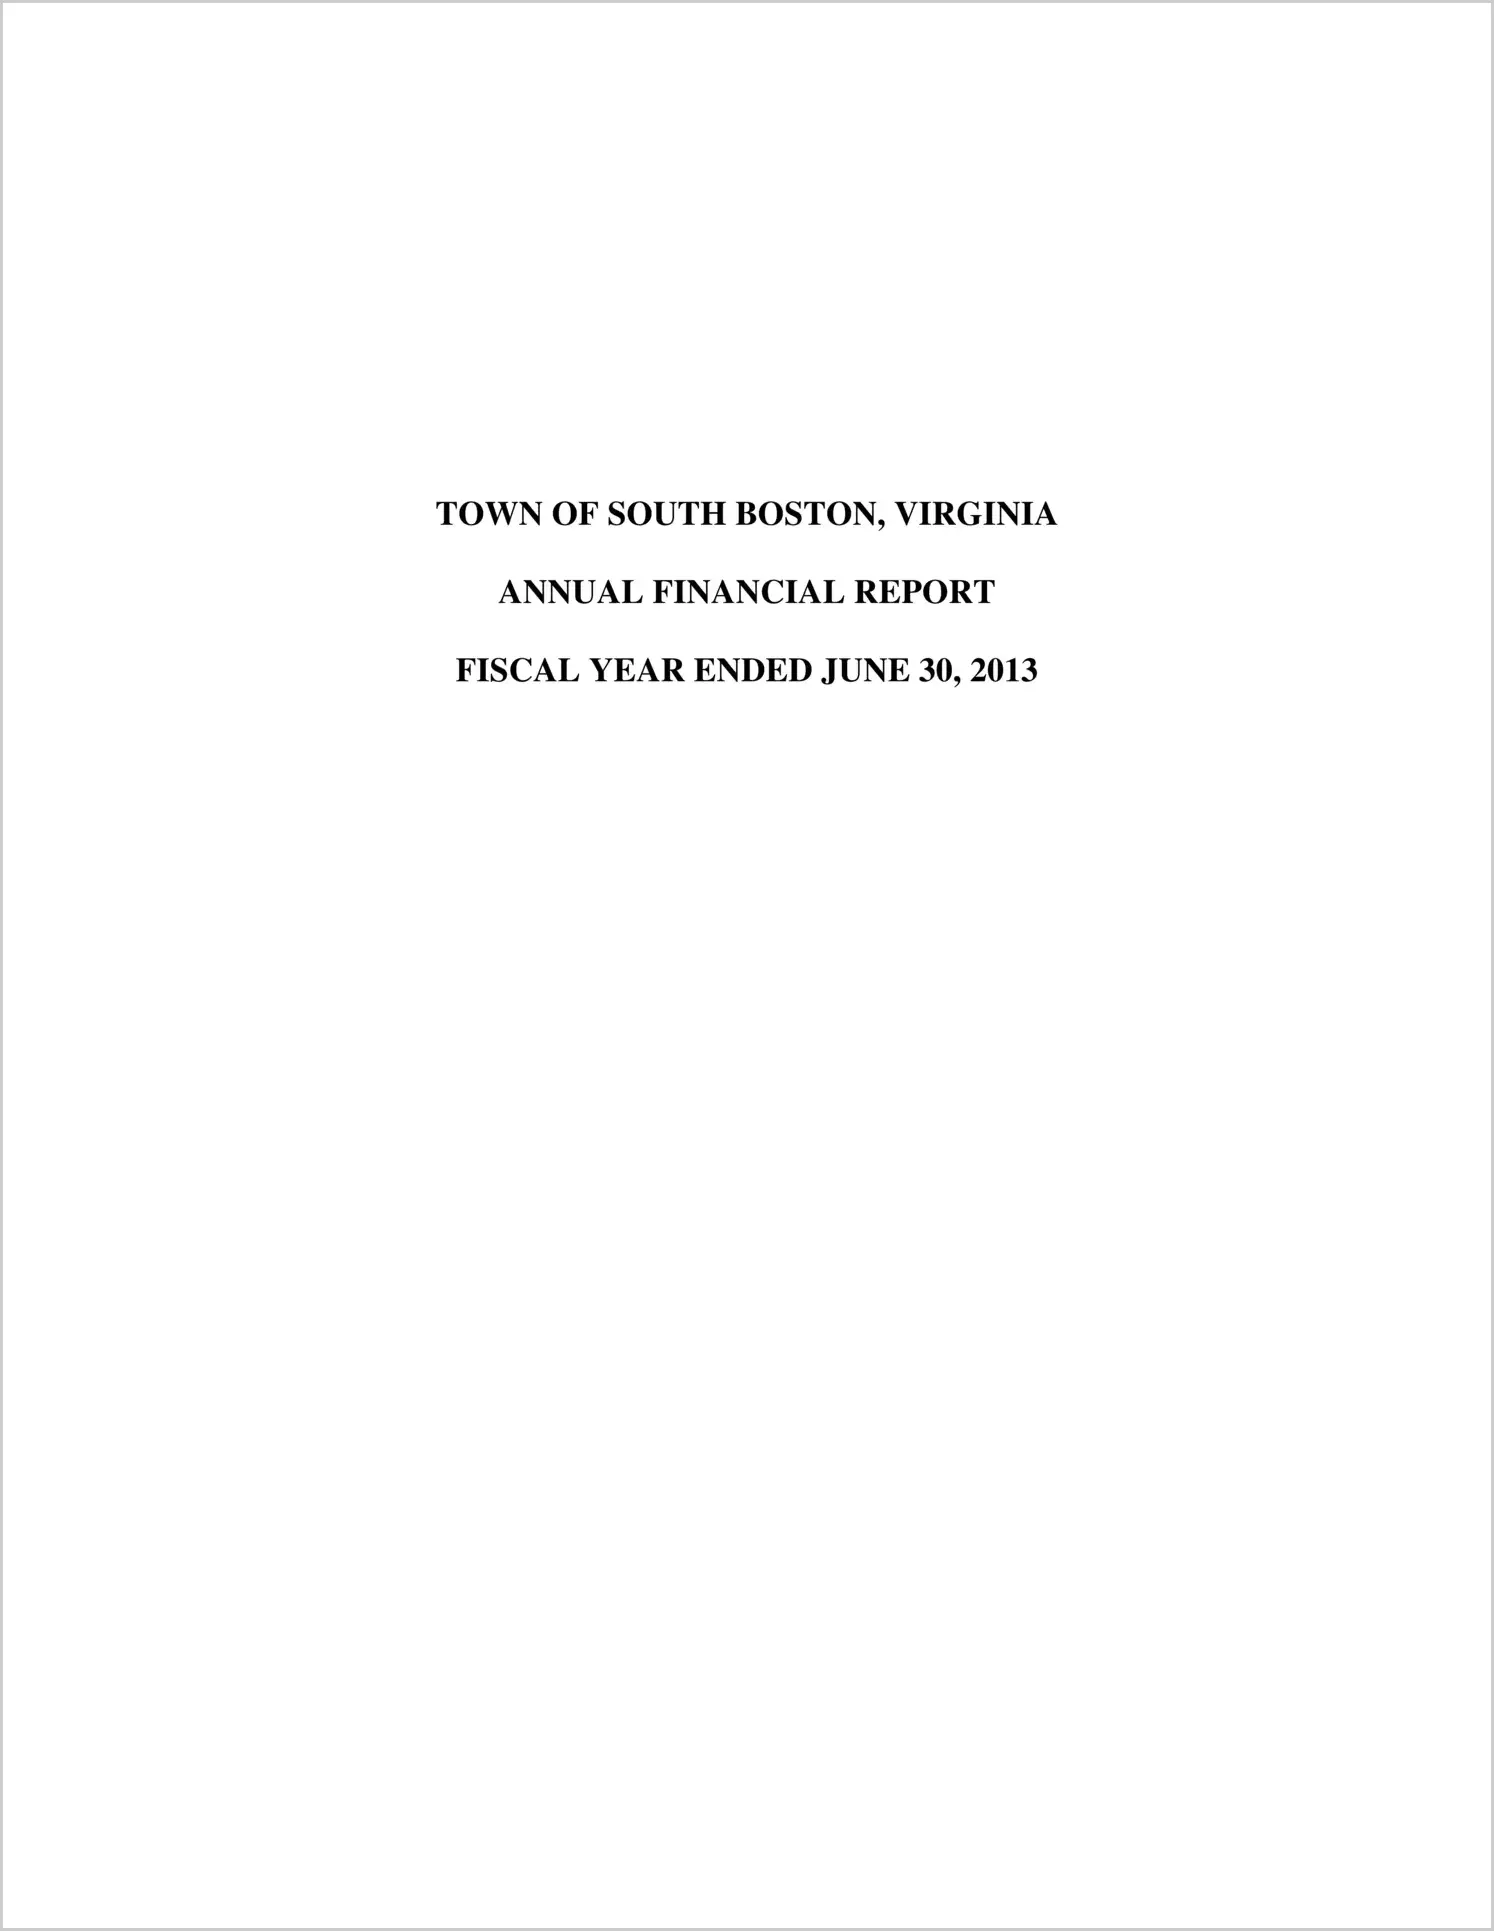 2013 Annual Financial Report for Town of South Boston